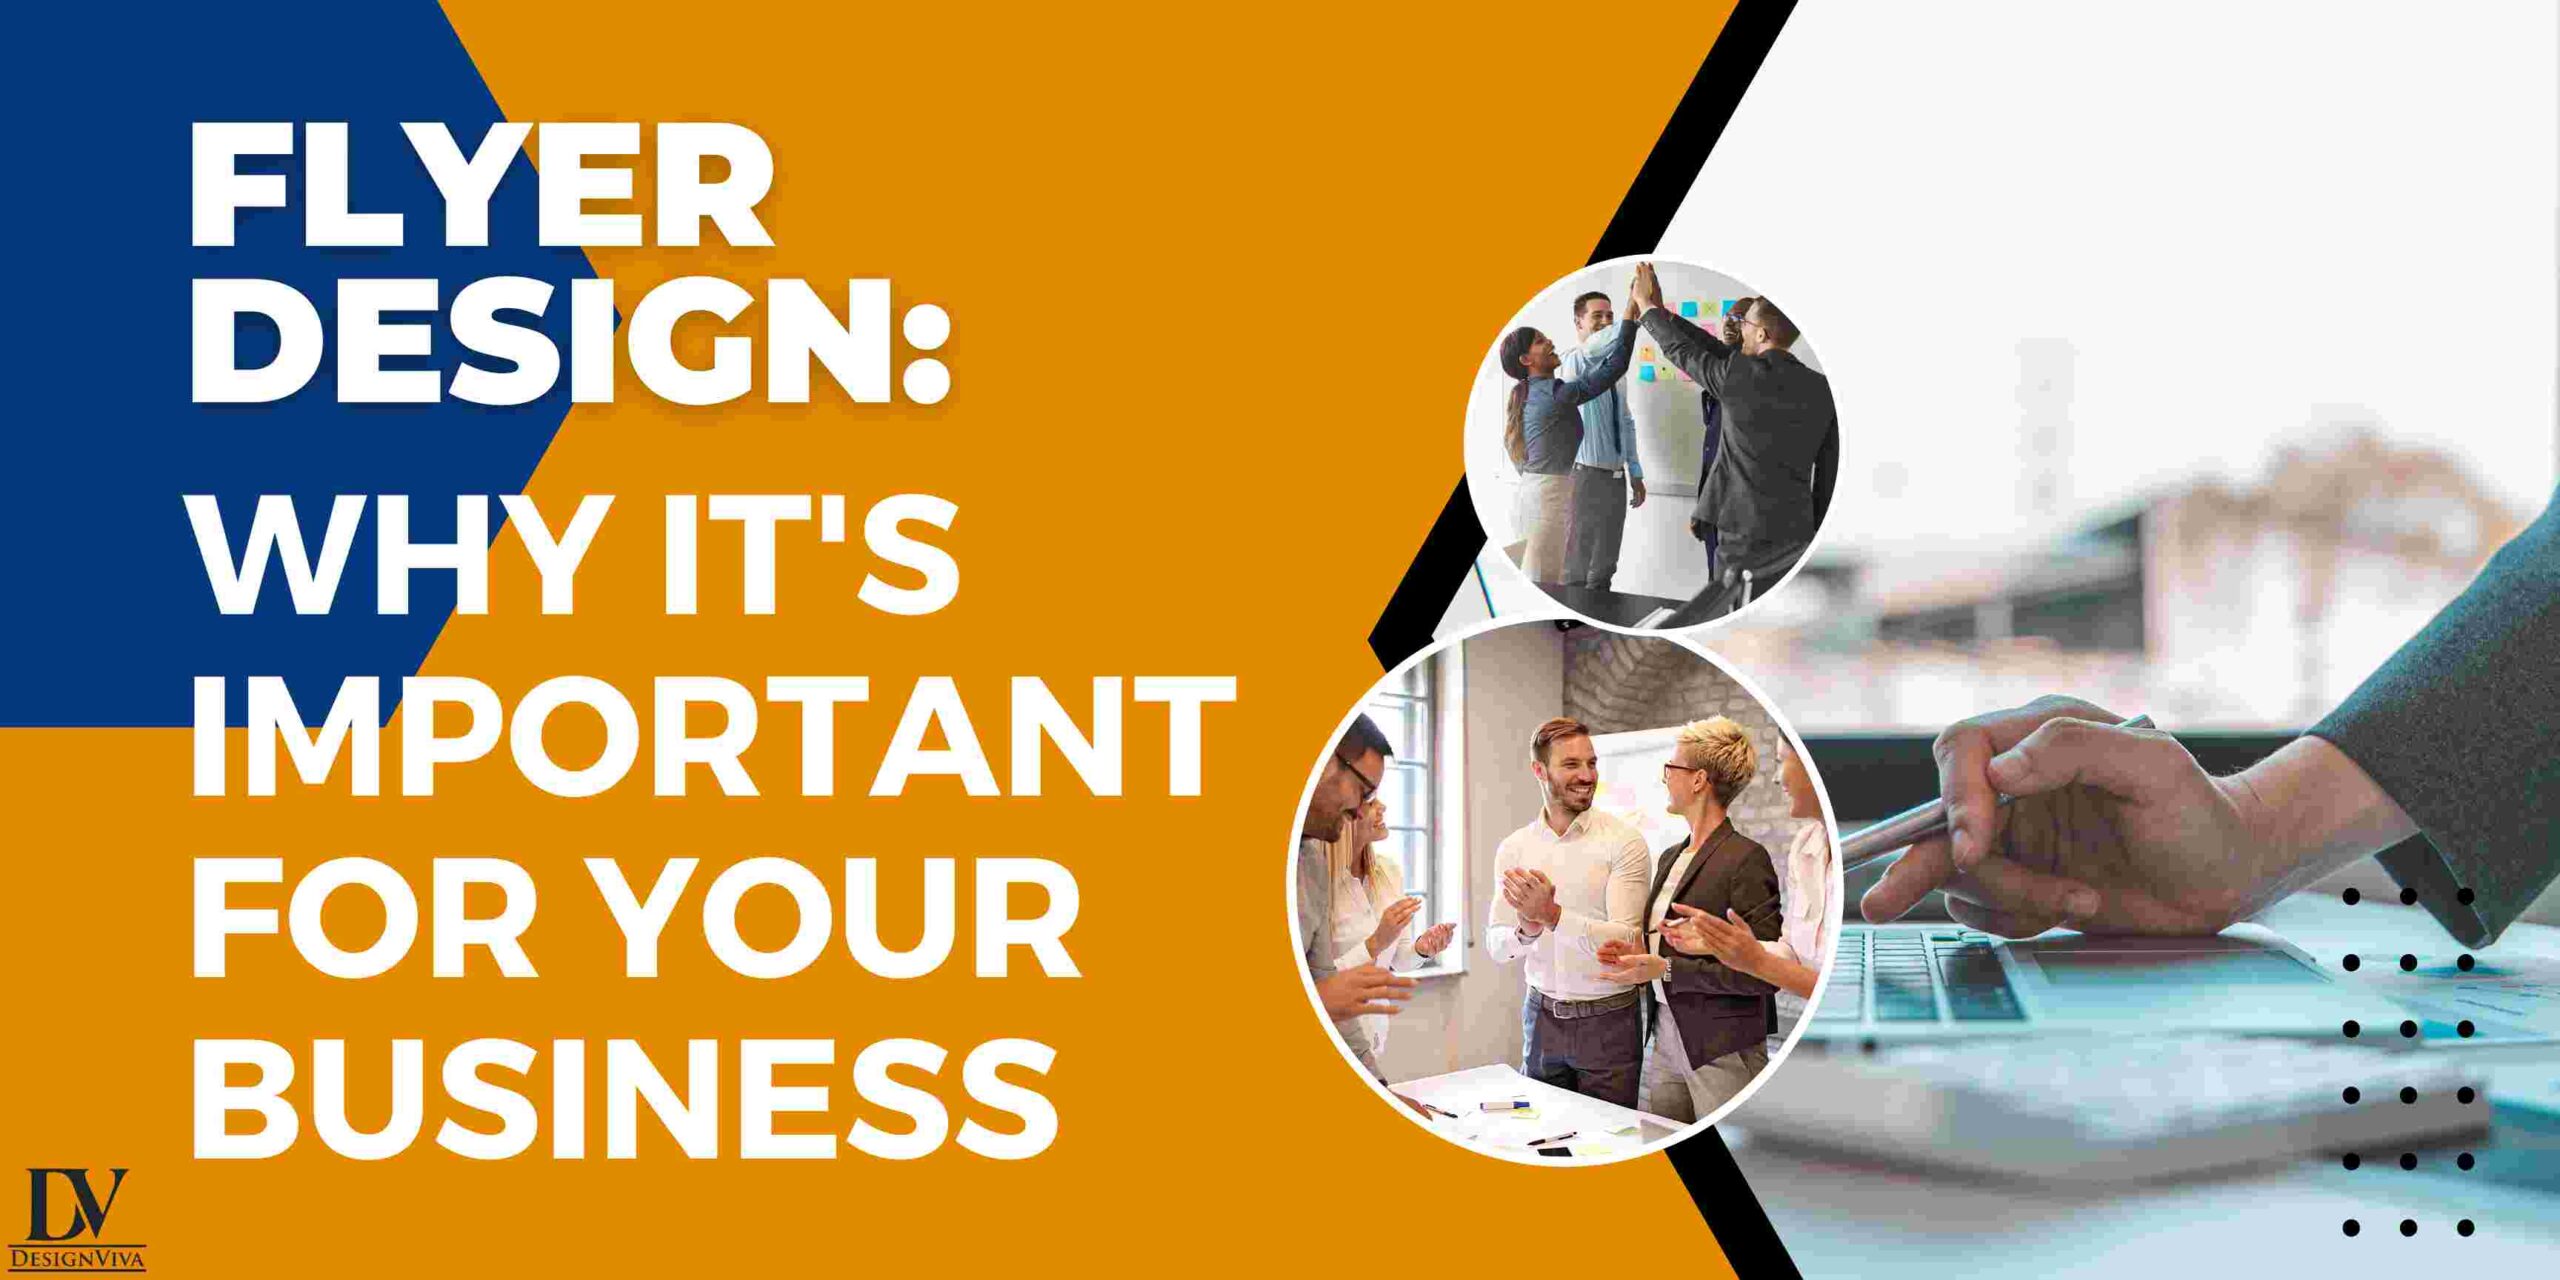 Flyer Design: Why It's Important For Your Business